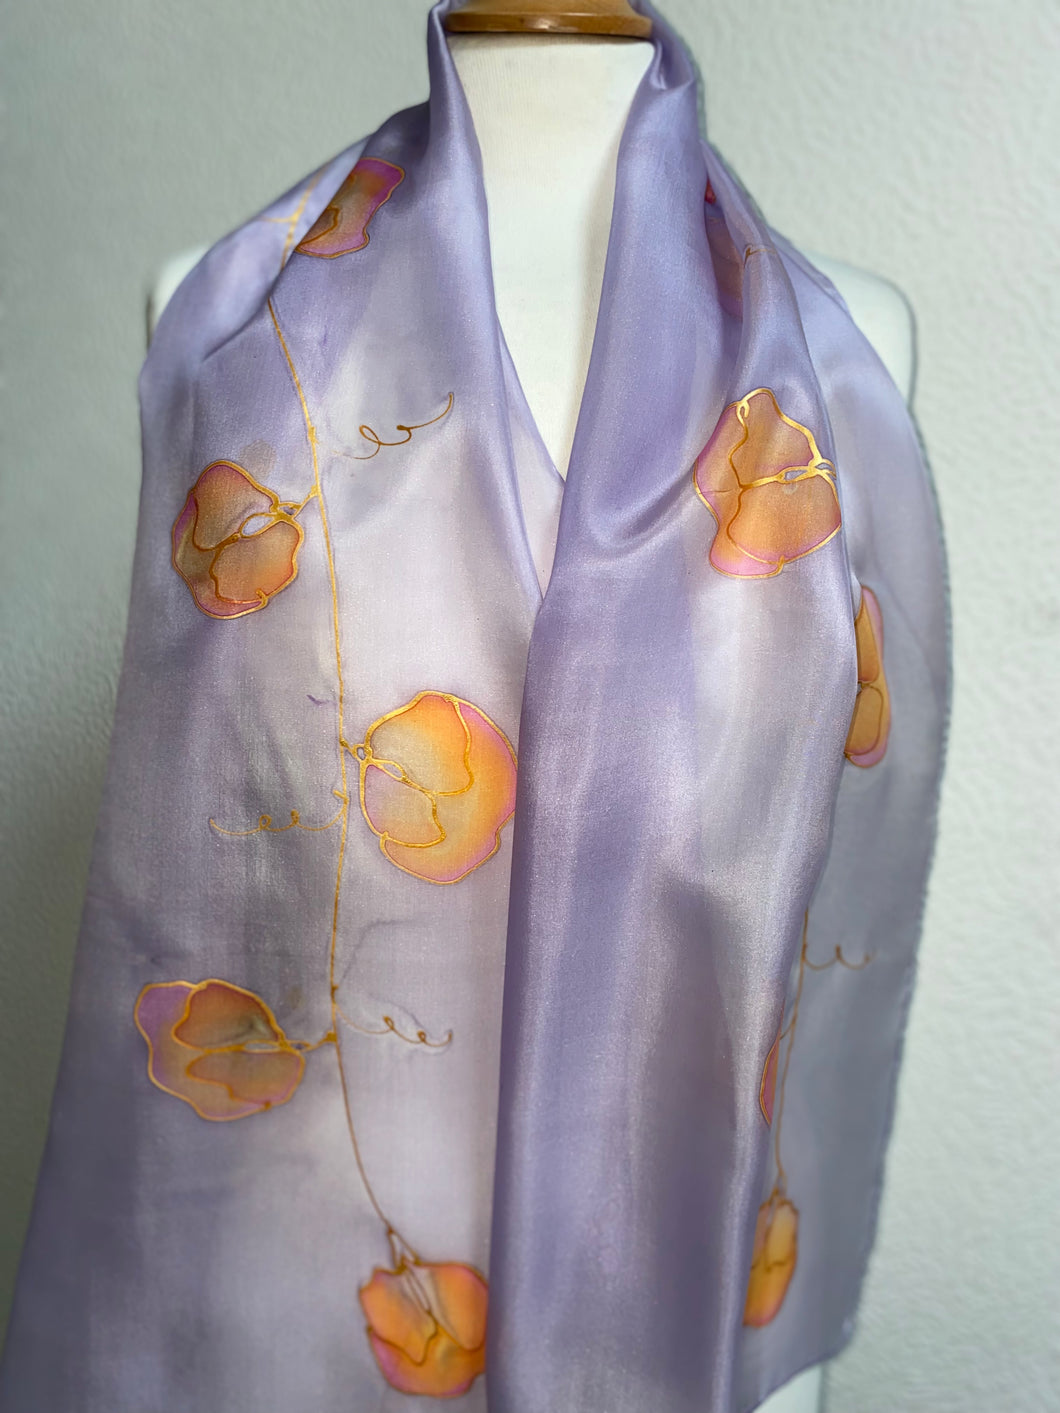 Sweet Pea Design Long Scarf : Hand Painted Silk in Pastel Shades